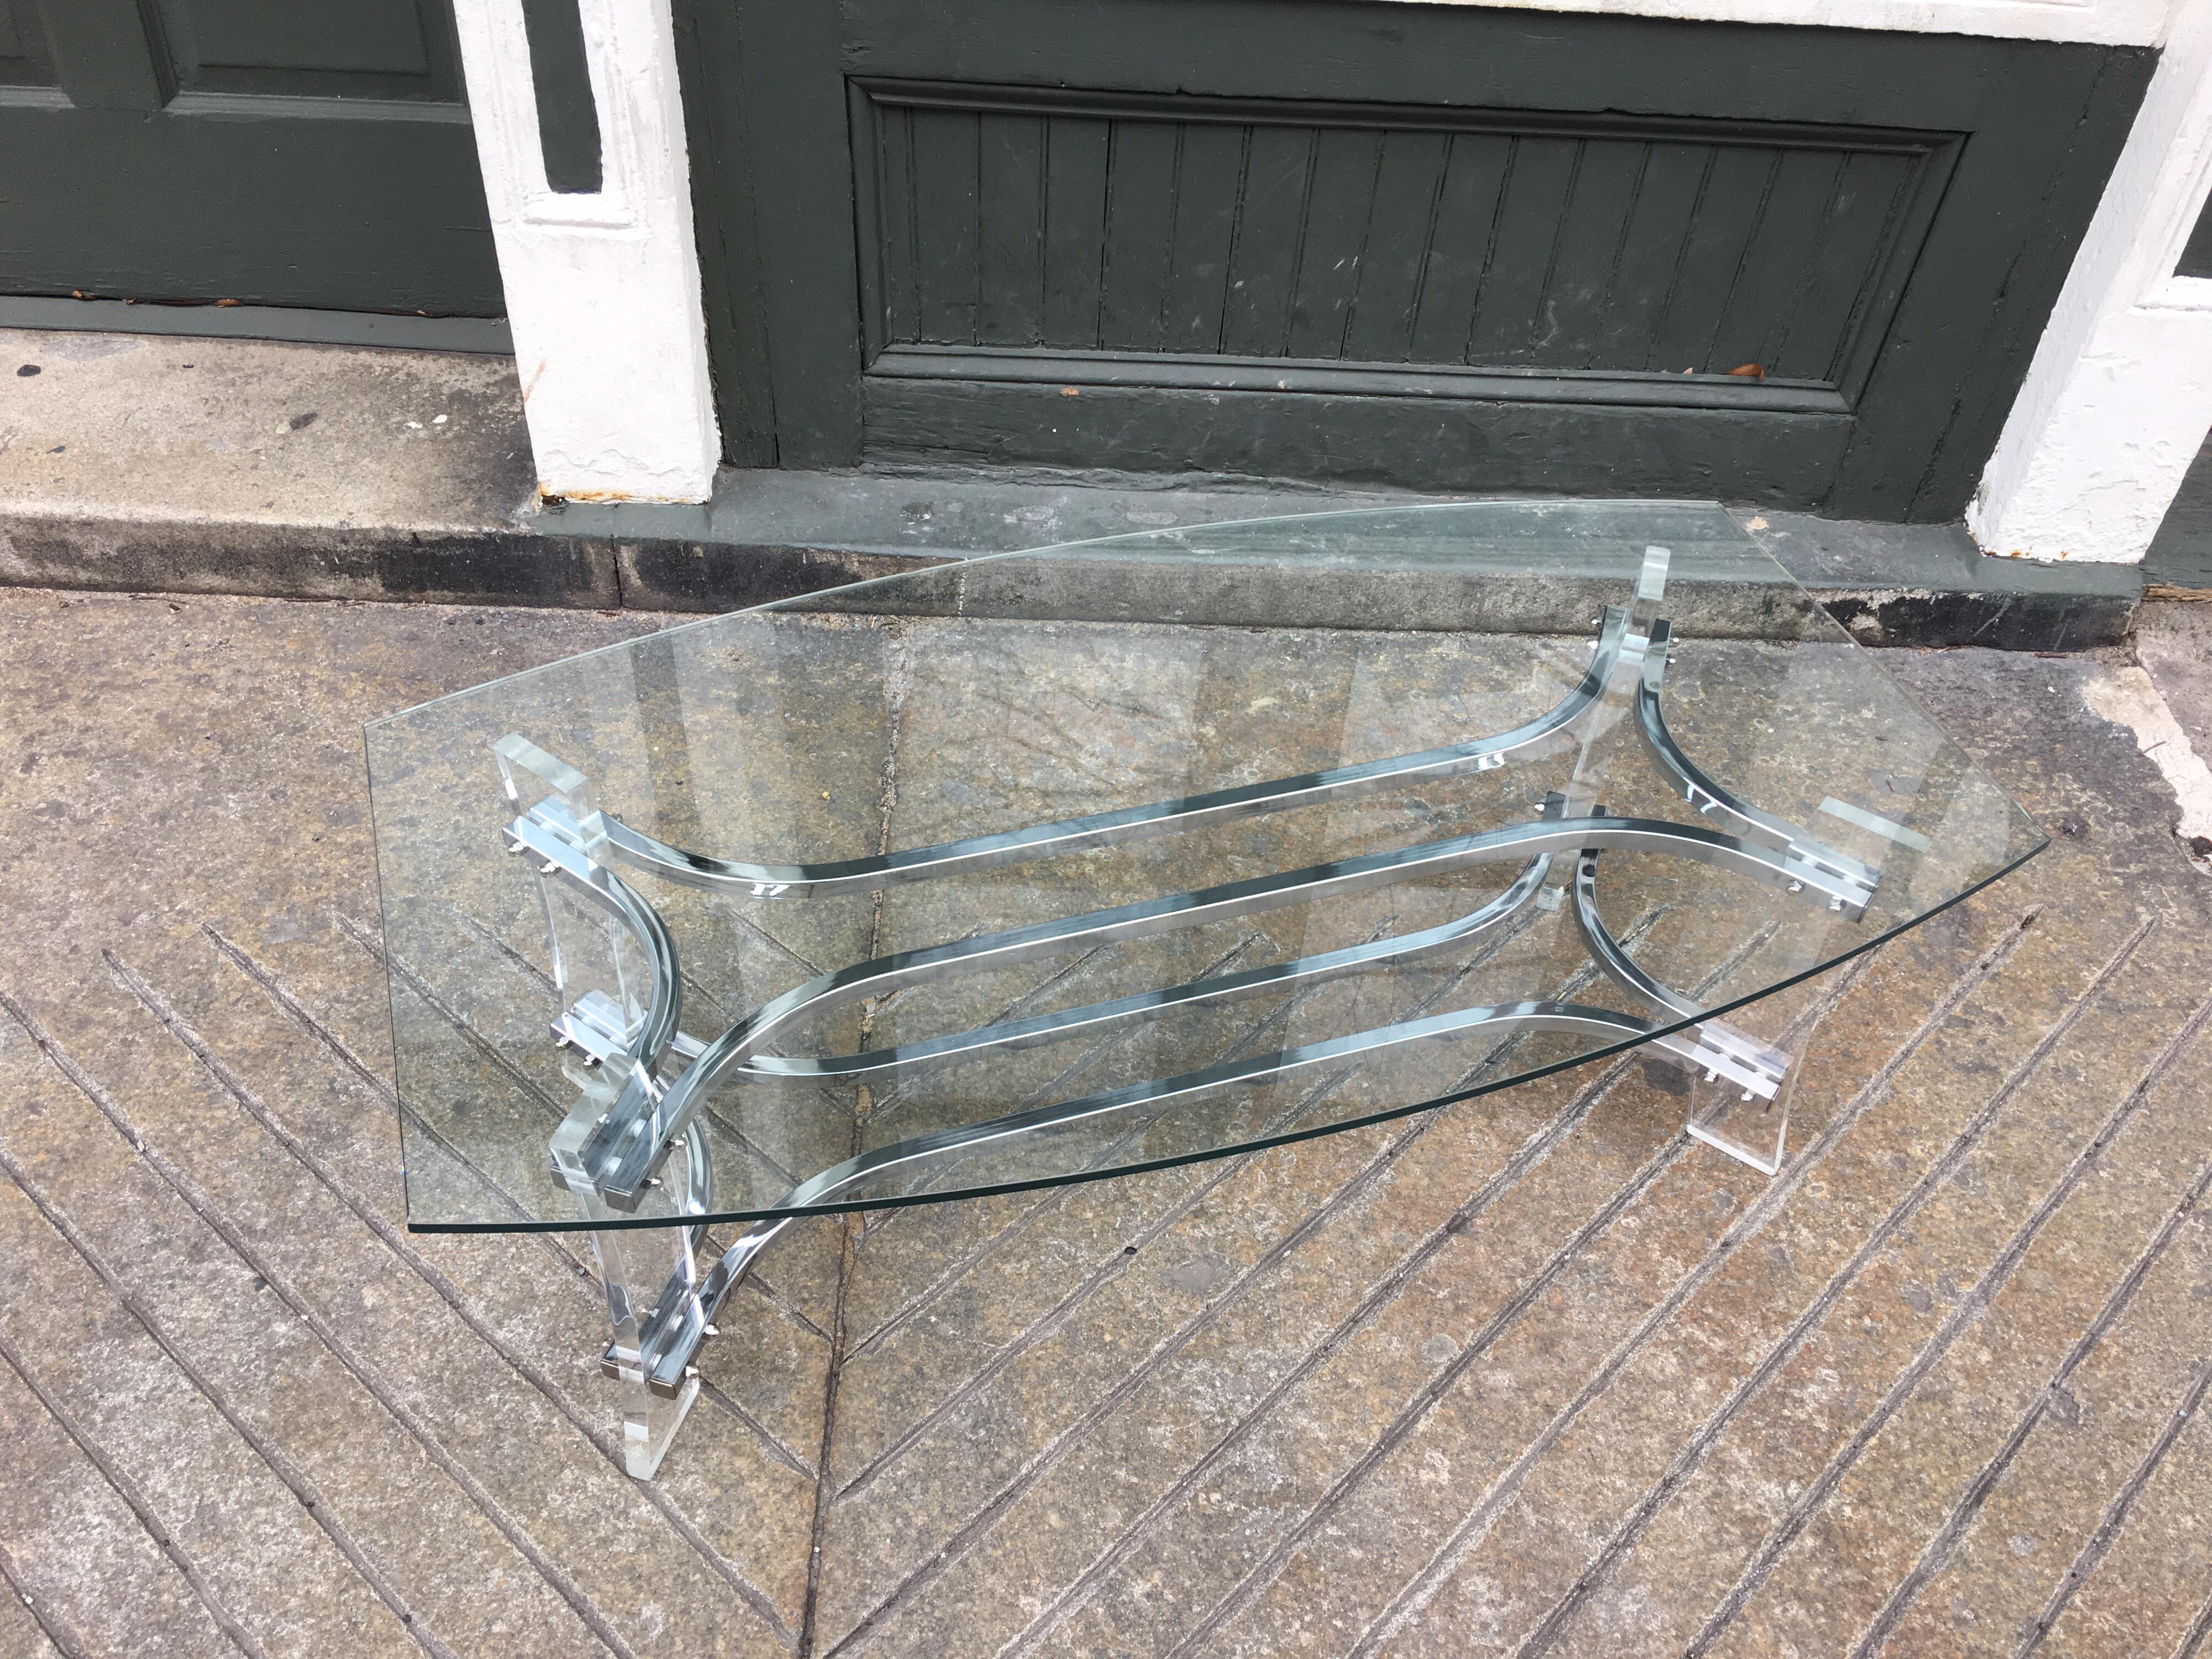 American glass, Lucite and chrome coffee table. Glass top has ends that taper in a bit to give this table a unique look! Chrome is in amazing clean condition! Lucite has been polished and presents very well!